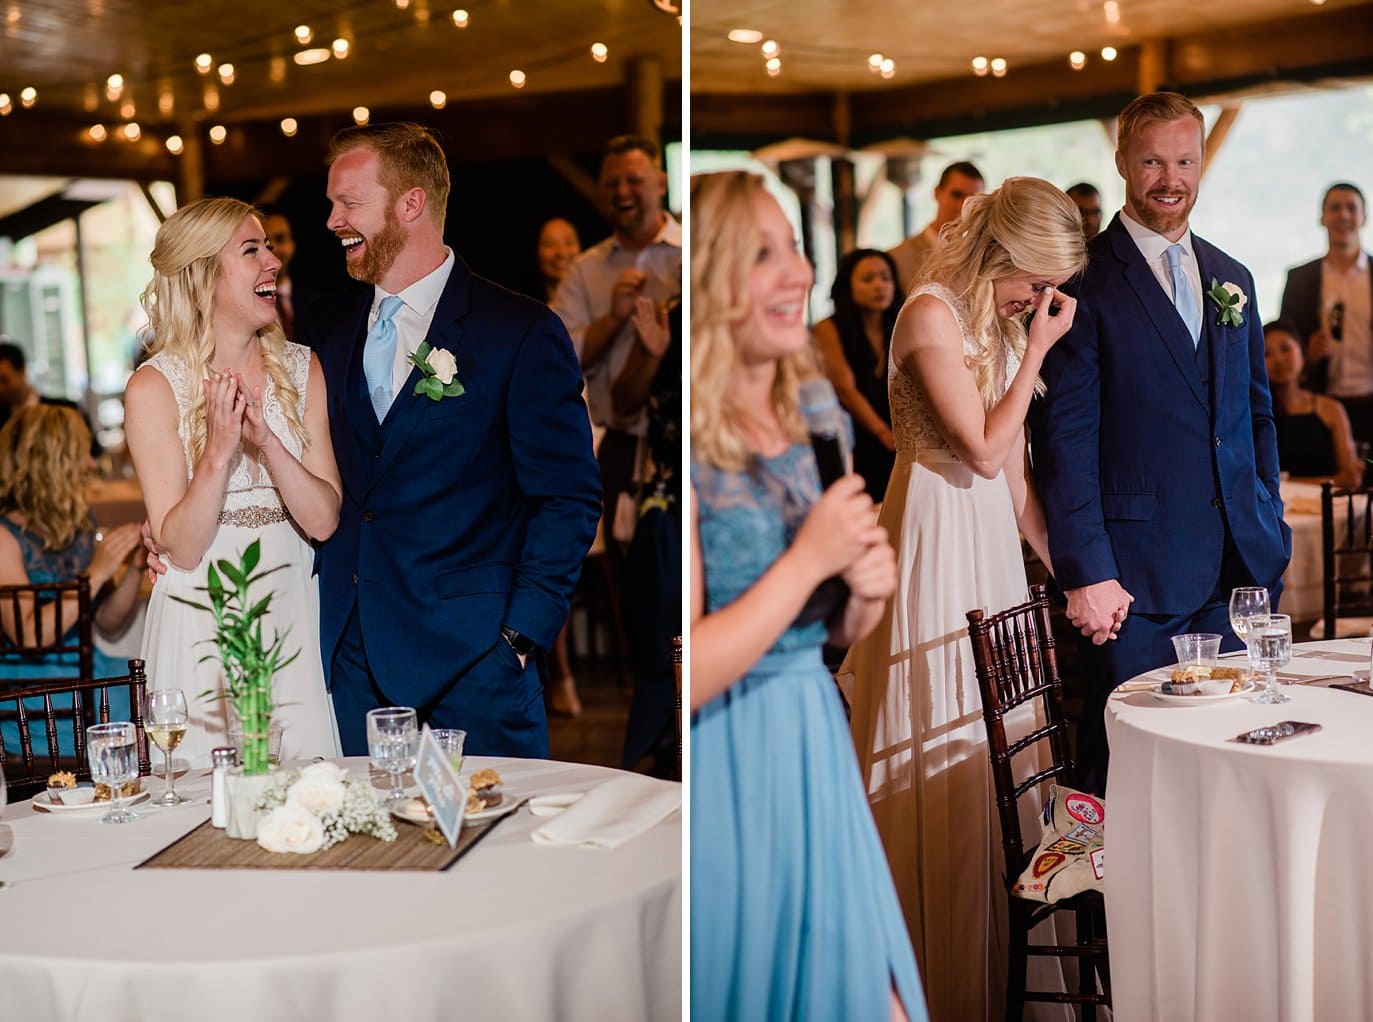 sister of bride toasting bride and groom during wedding reception at Grand Lake Lodge wedding by Tabernash wedding photographer Jennie Crate Photographer